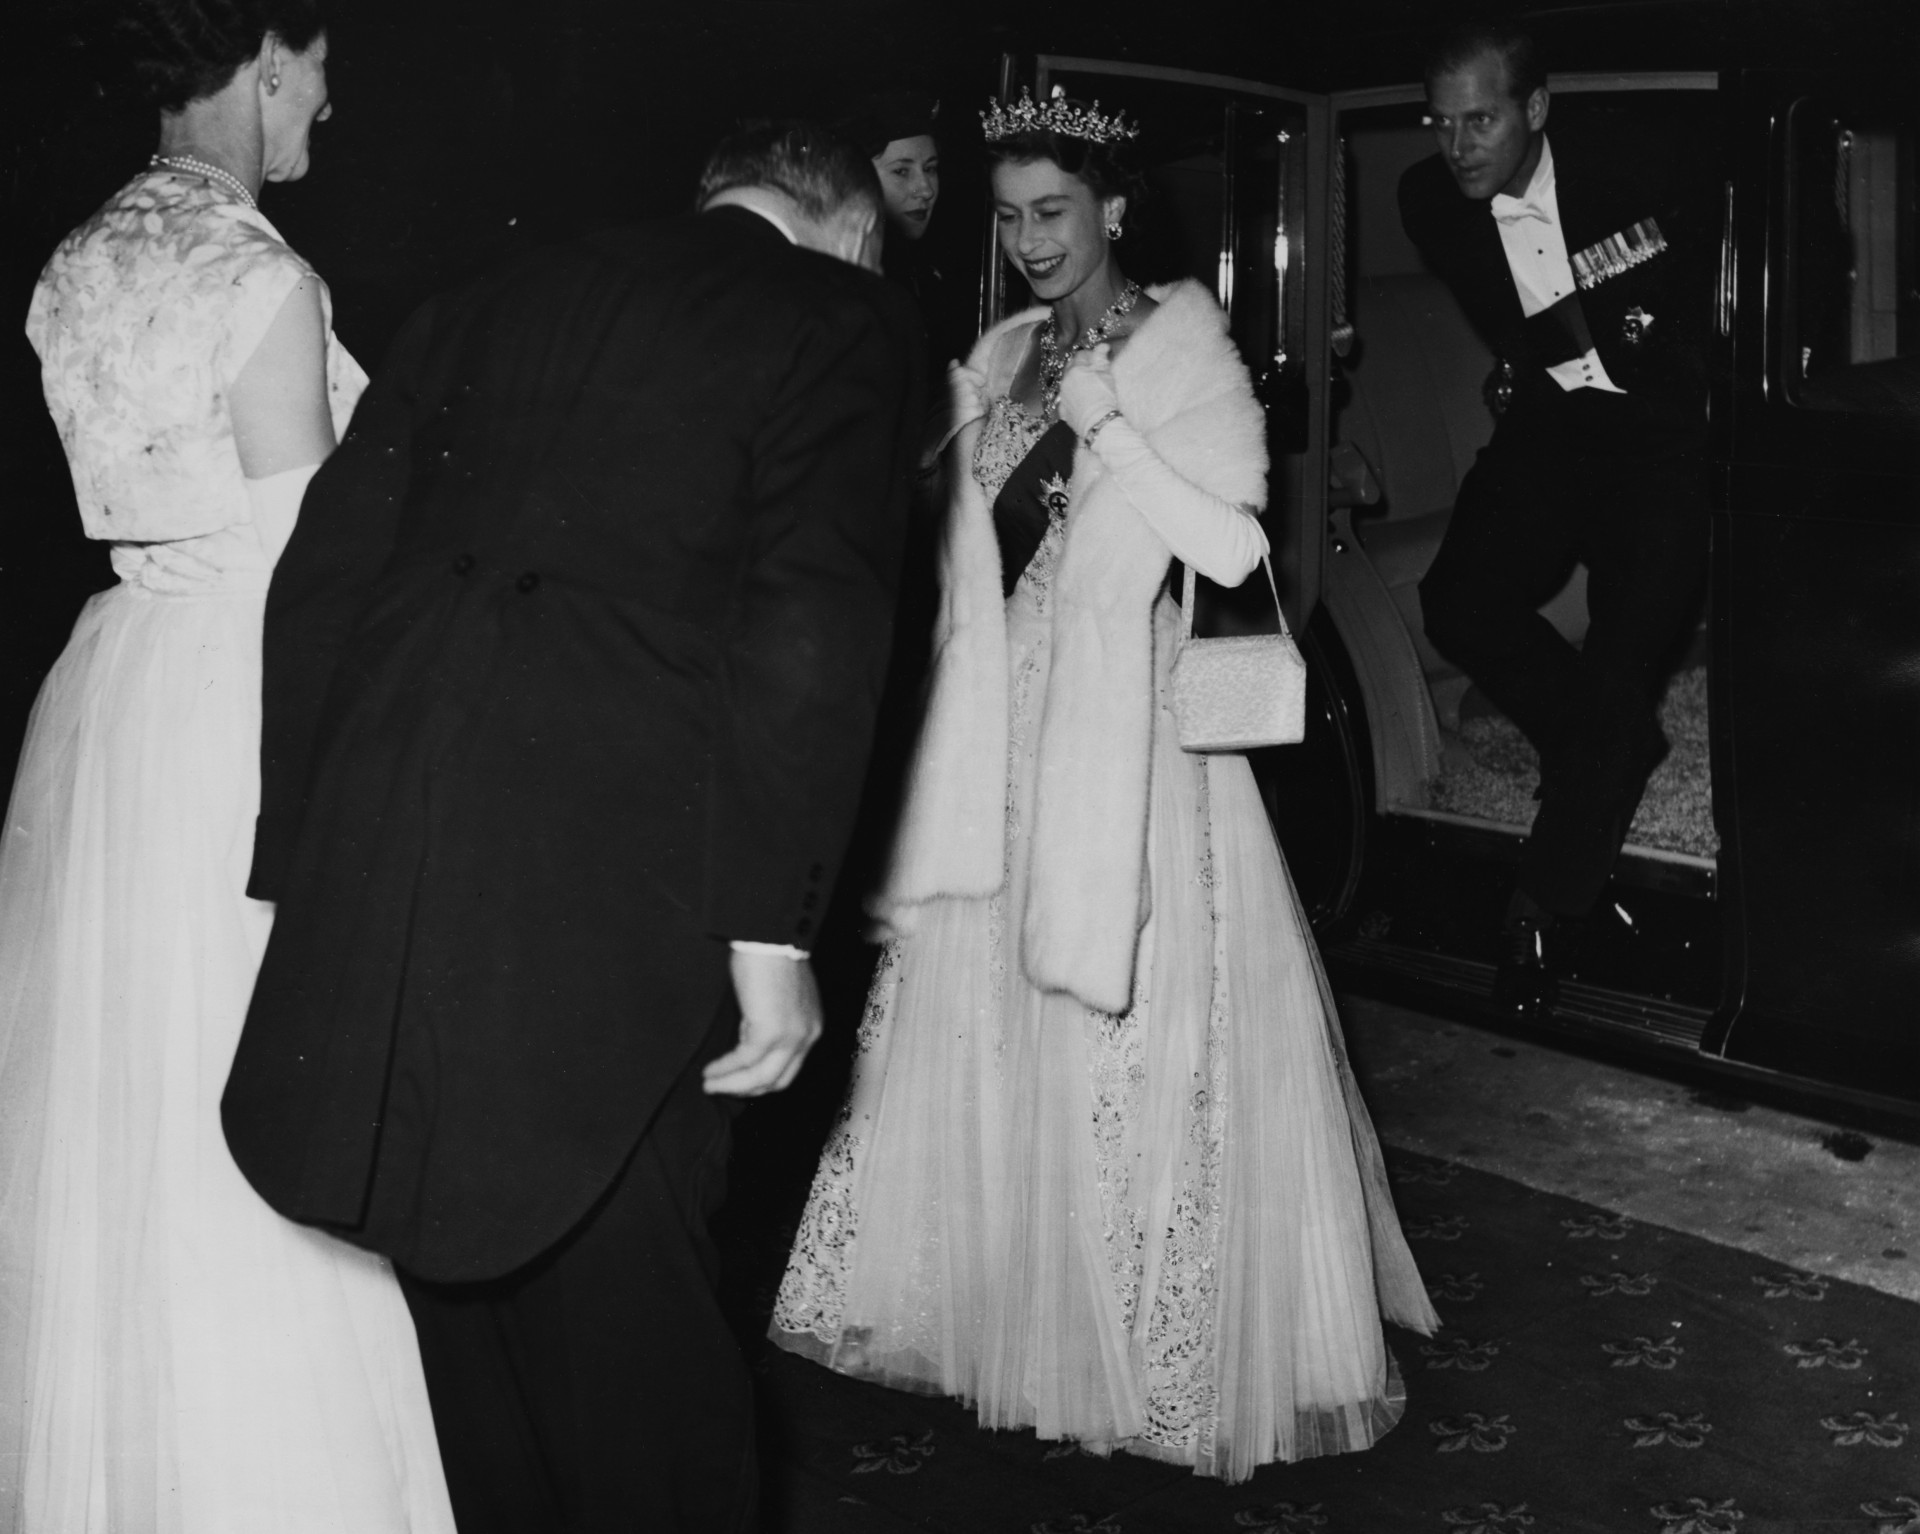 During the Australian leg of their tour, Queen Elizabeth and the Duke of Edinburgh are greeted by the Hon. Thomas Playford upon their arrival for a State Banquet at Parliament House.<p><a href="https://www.msn.com/en-au/community/channel/vid-7xx8mnucu55yw63we9va2gwr7uihbxwc68fxqp25x6tg4ftibpra?cvid=94631541bc0f4f89bfd59158d696ad7e">Follow us and access great exclusive content every day</a></p>